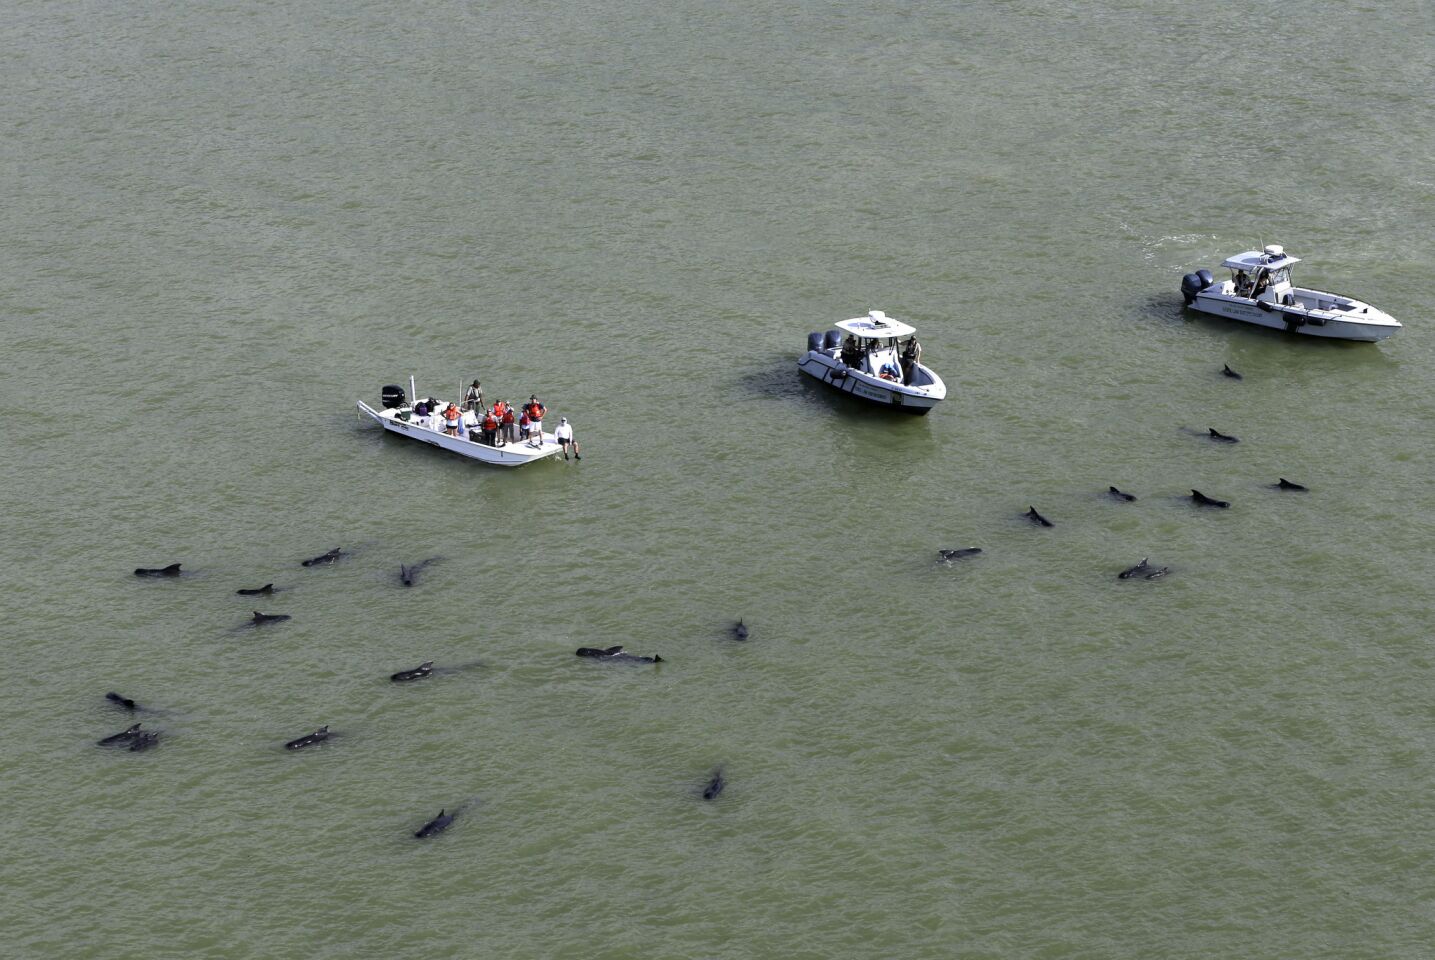 Officials in boats monitor the scene where dozens of pilot whales are stranded in shallow water in a remote area of Florida's Everglades National Park, Wednesday, Dec. 4, 2013.